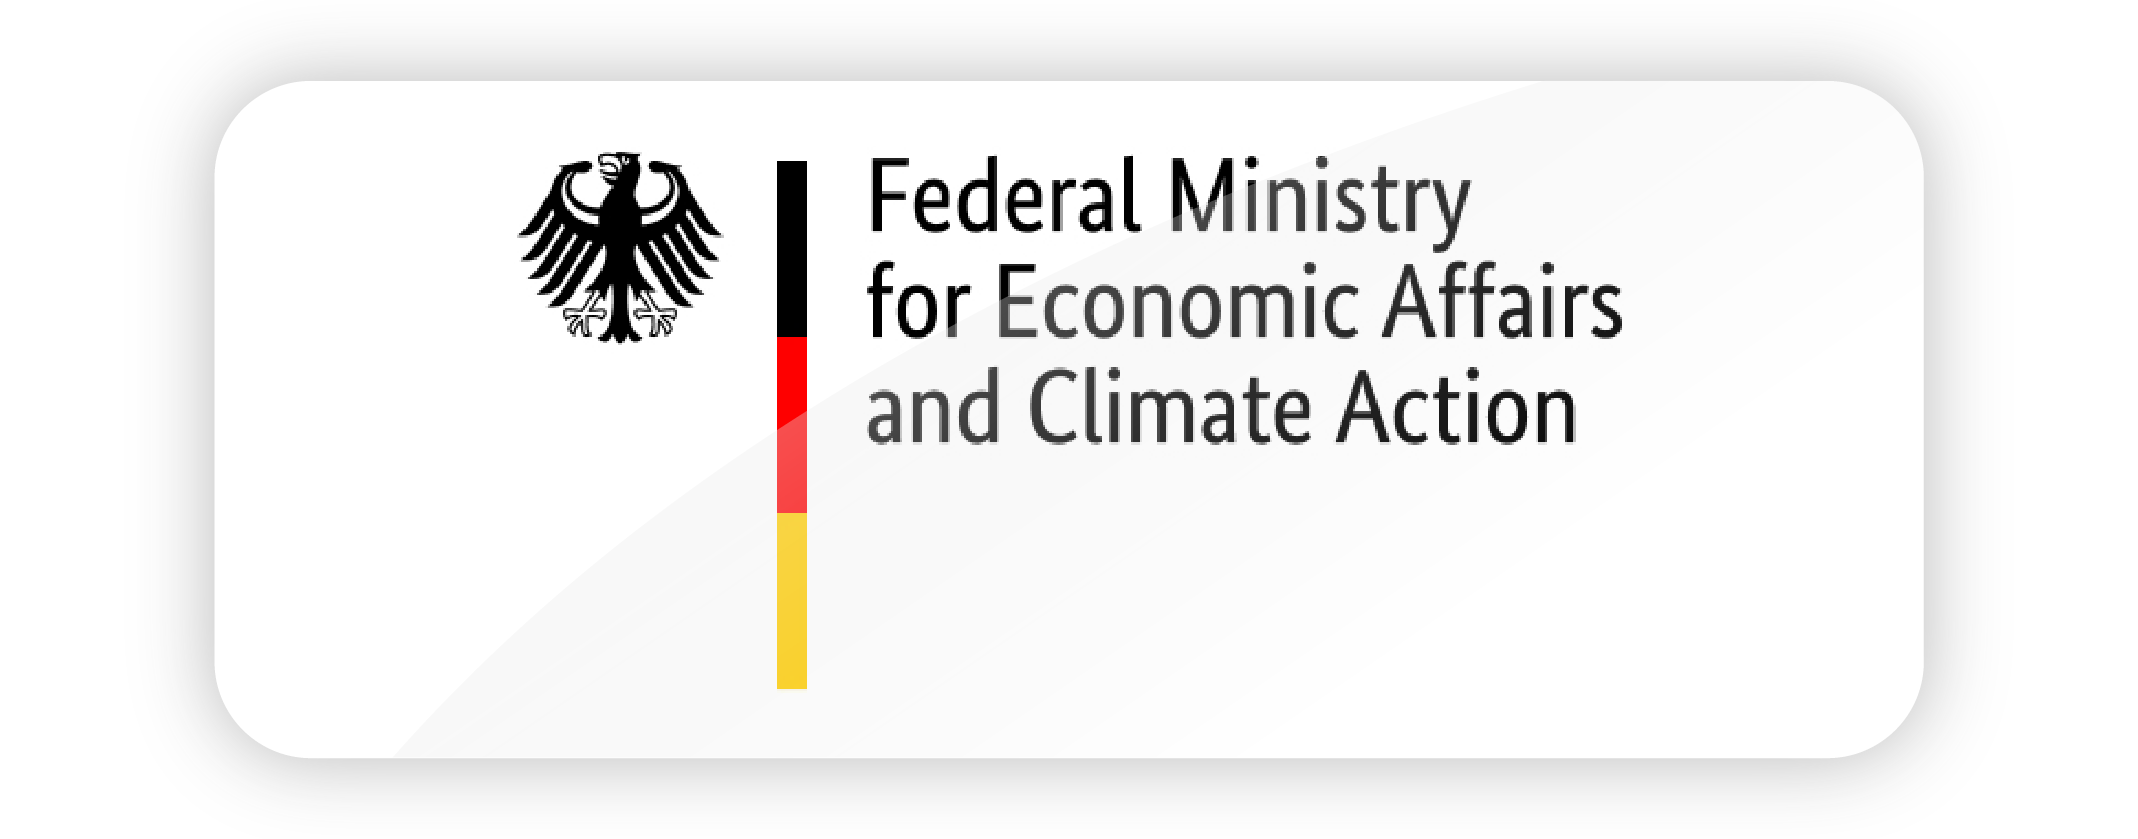 Federal Ministry for Economic Affairs and Climate action